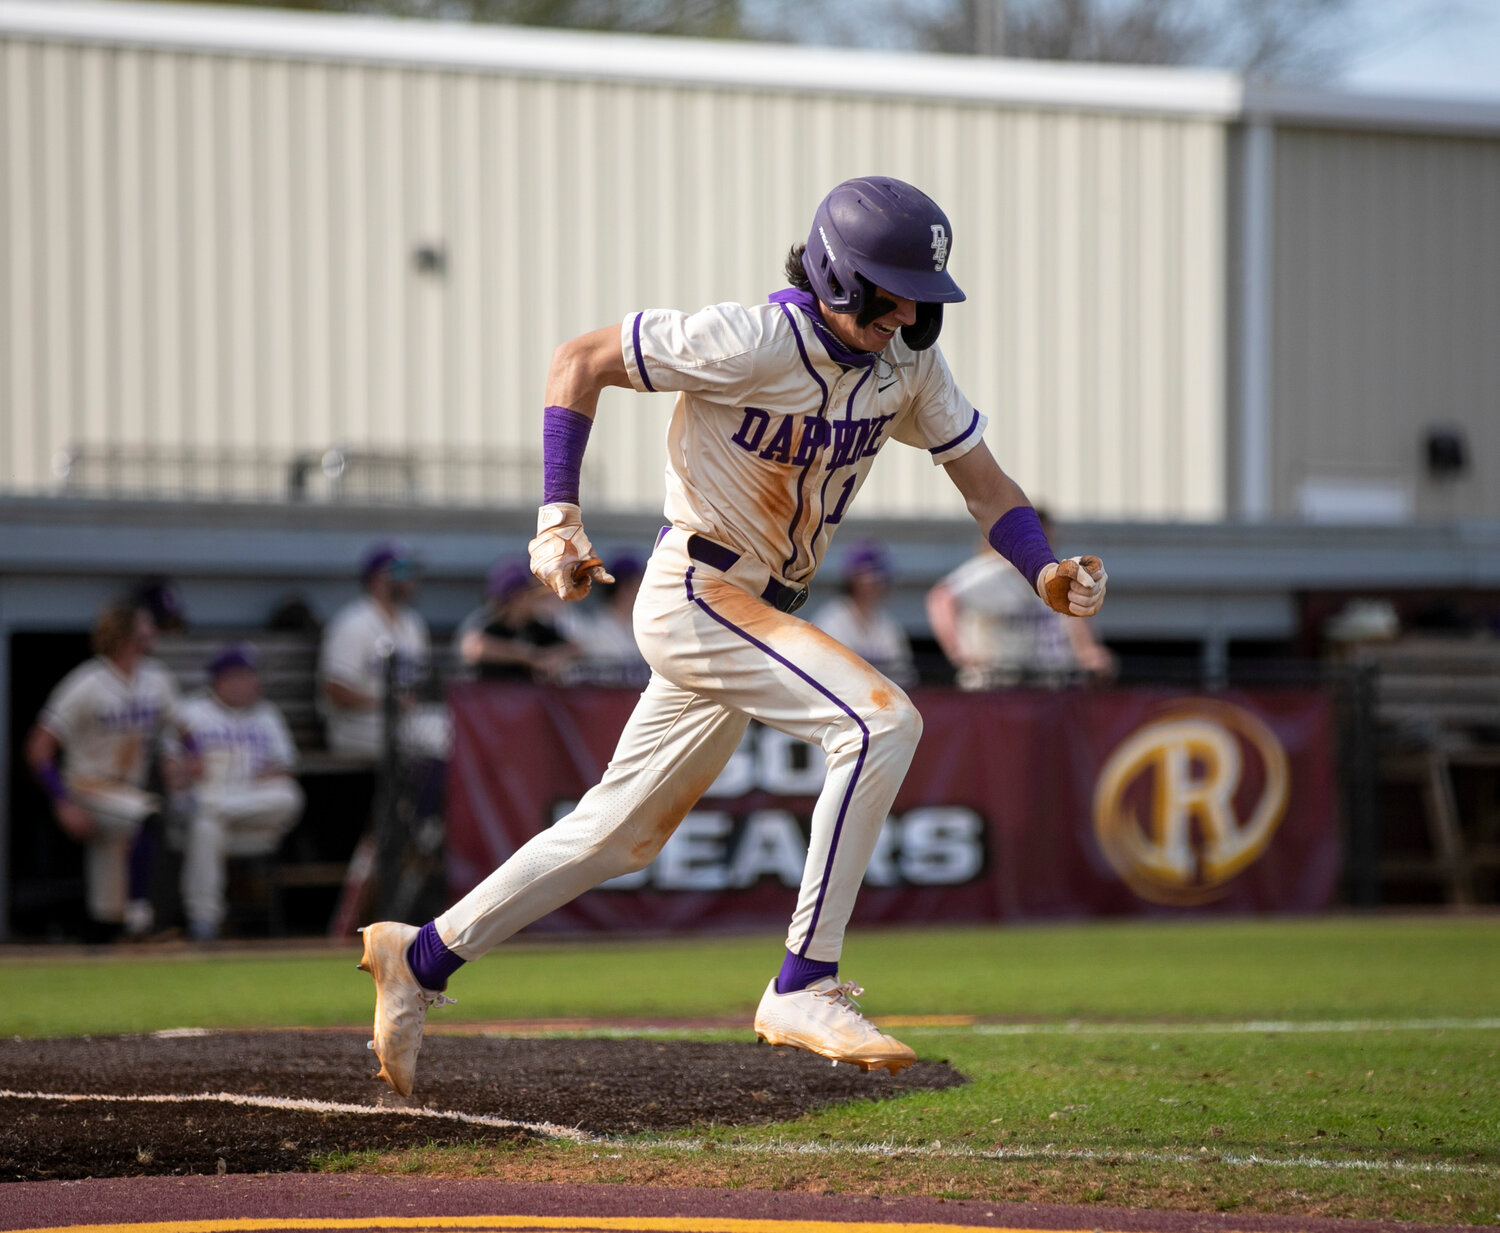 Daphne shortstop Steele Hall accelerates out of the batter’s box during the Trojans’ contest against the Tuscaloosa County Wildcats at Robertsdale High School as part of the Prep Baseball Report South Alabama Showdown on Feb. 25. The Tennessee commit will return to the Daphne squad as a sophomore this season and will be back at the second-annual South Alabama Showdown from Feb. 22-24, 2024.